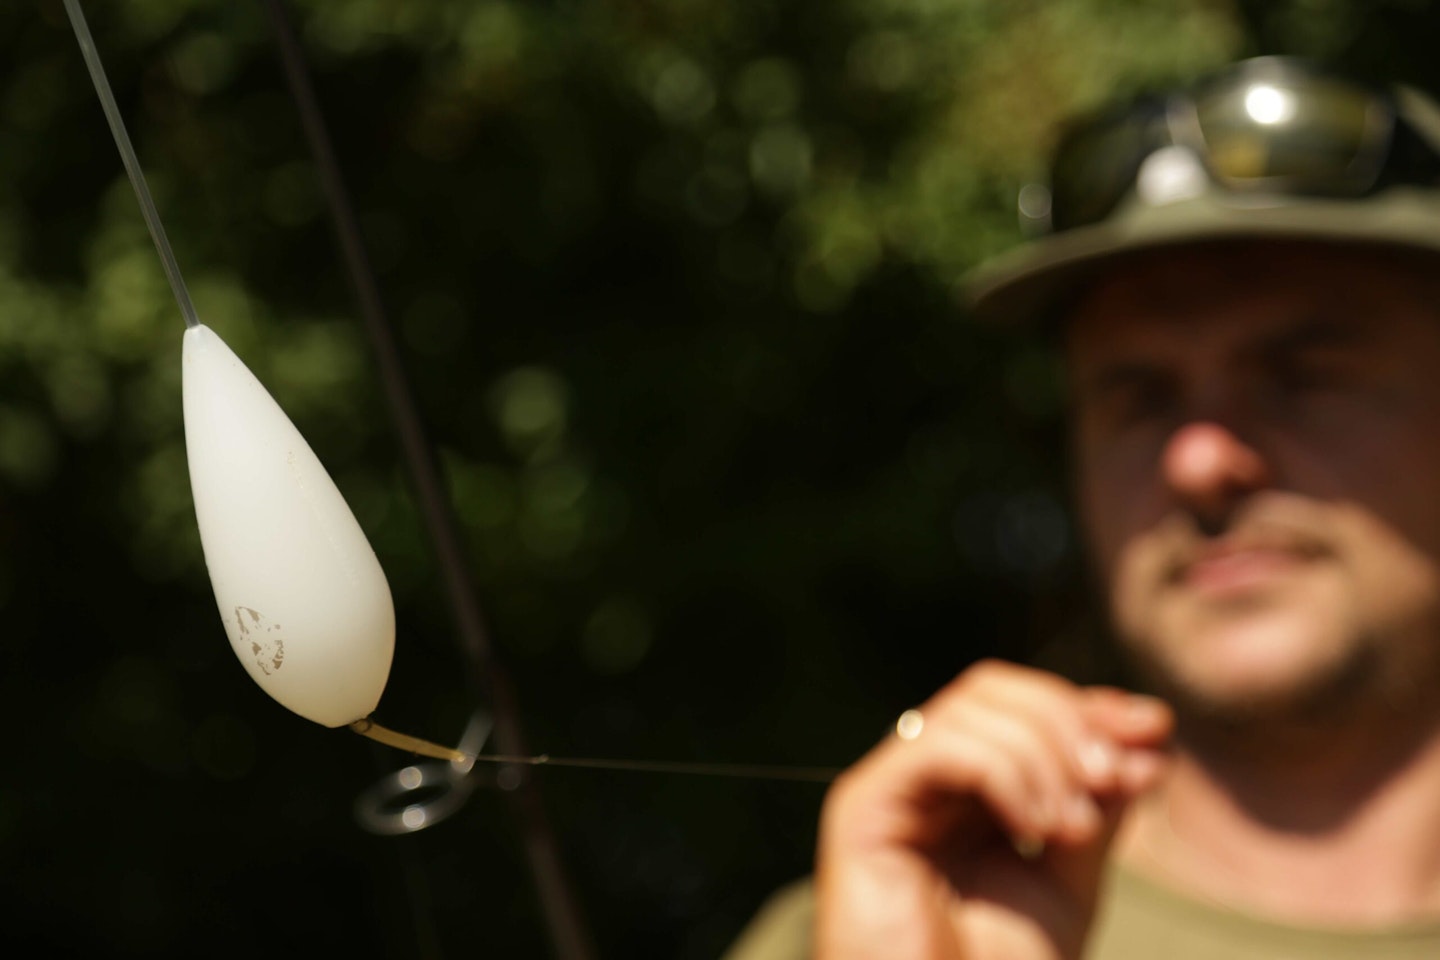 Catch more carp with expert tips from Scott Lloyd.